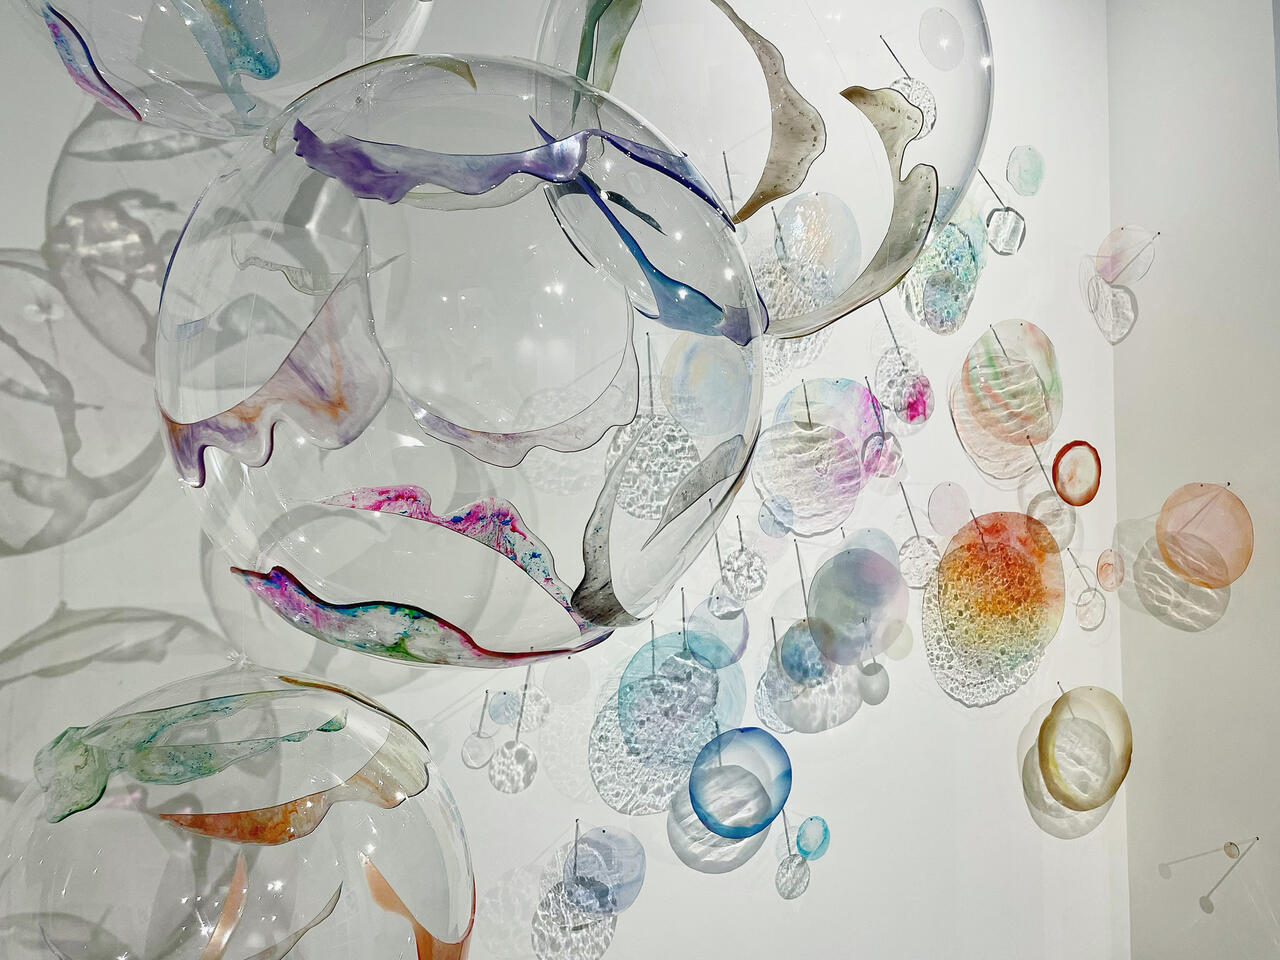 Bubble, a colorful installation made with epoxy resin with balloons